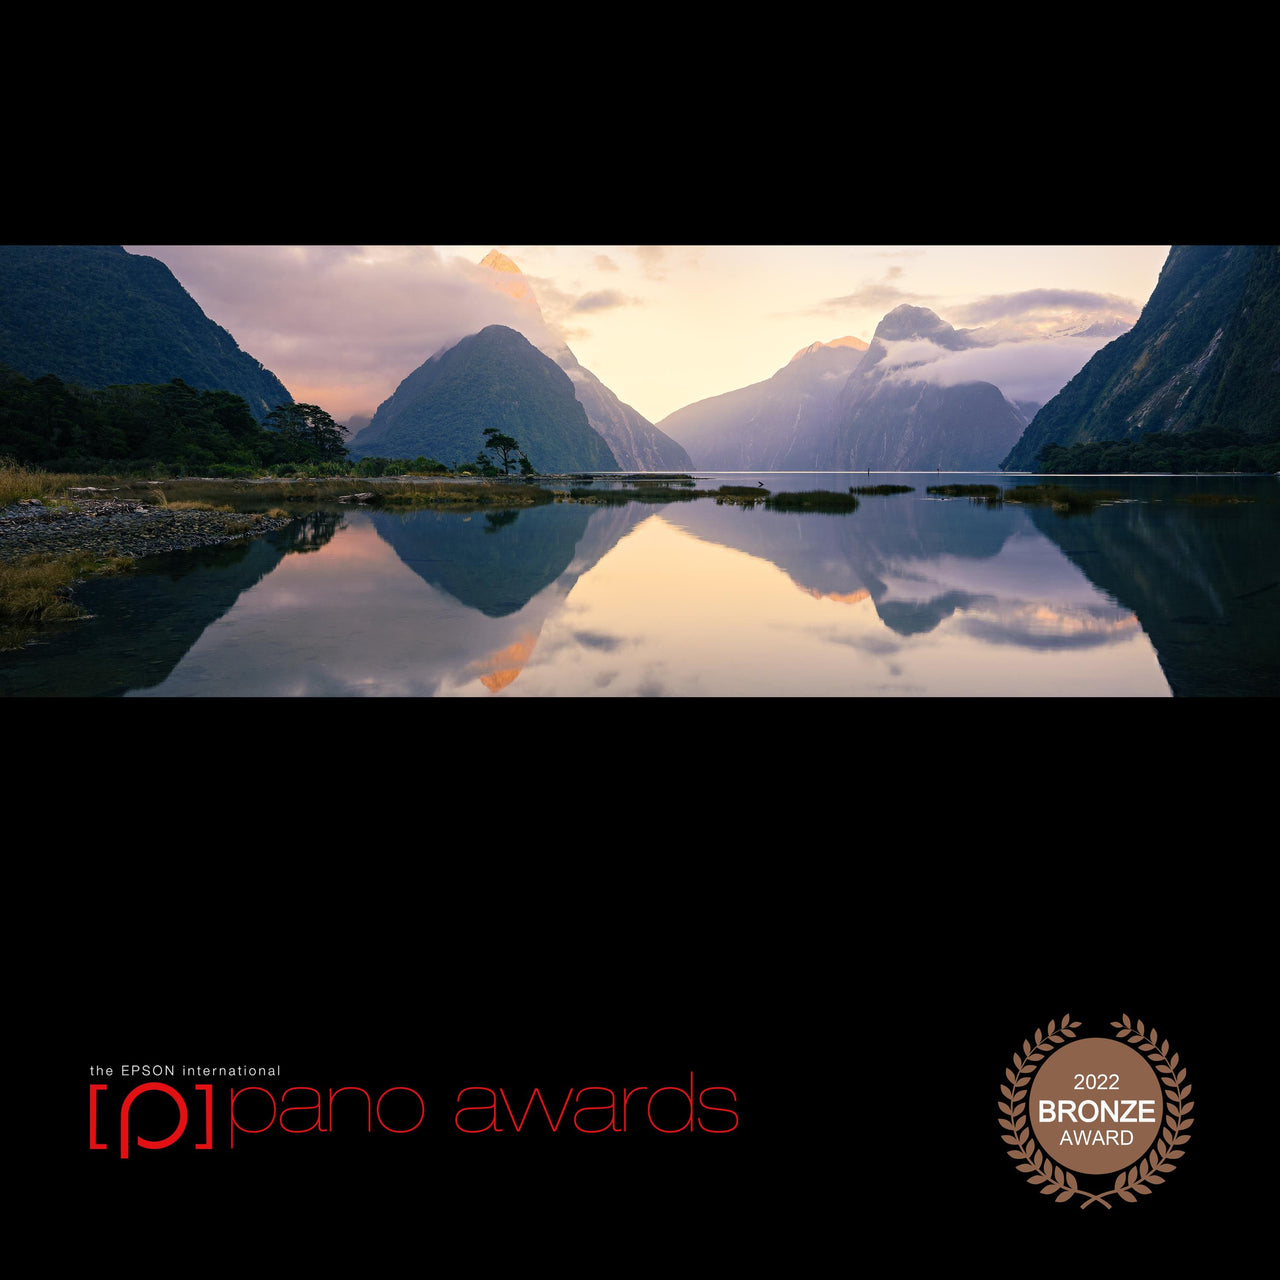 Three of my artworks receive a Bronze Award in the 2022 Epson International Pano Awards